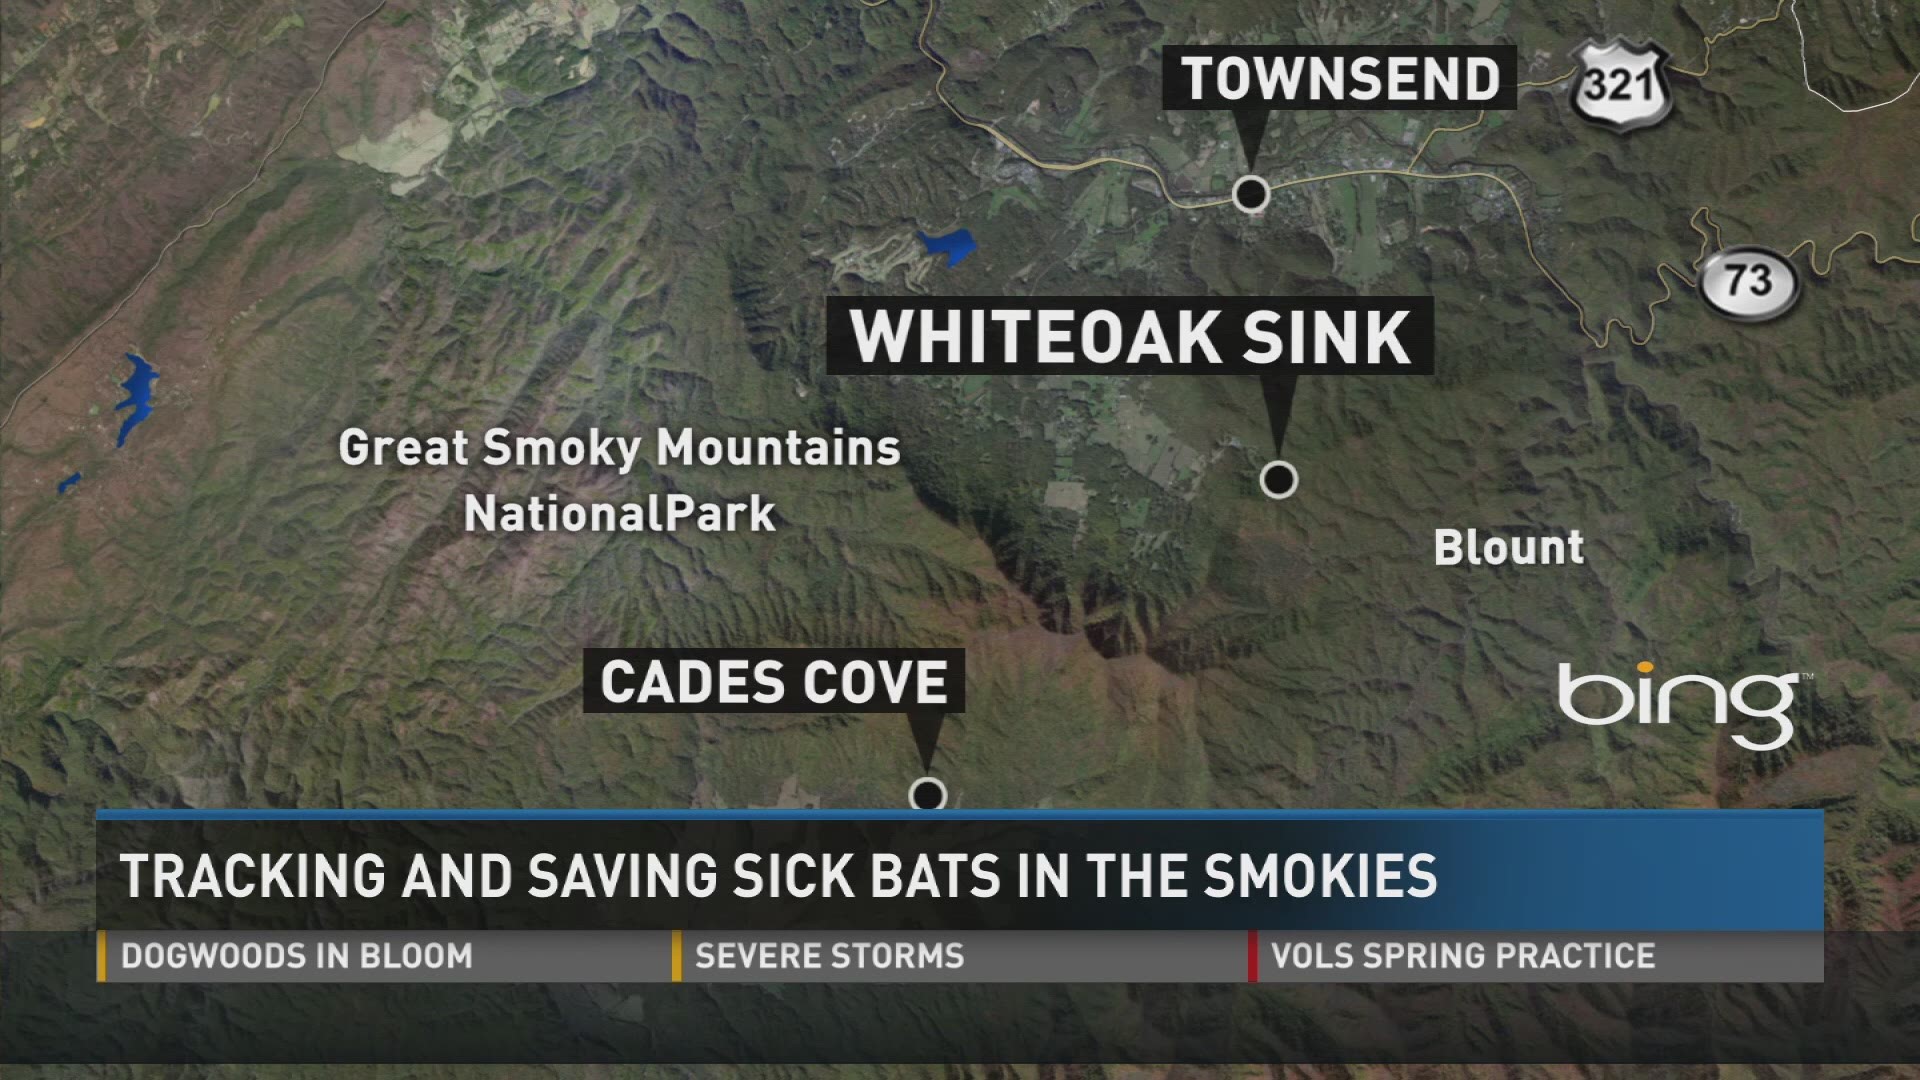 Mar 31, 2016: Thursday the Great Smoky Mountains partially reopened a popular area of the park, but left portions of Whiteoak Sink closed to help a dwindling bat population impacted by white nose syndrome. Biologists are using electronic bat detectors to